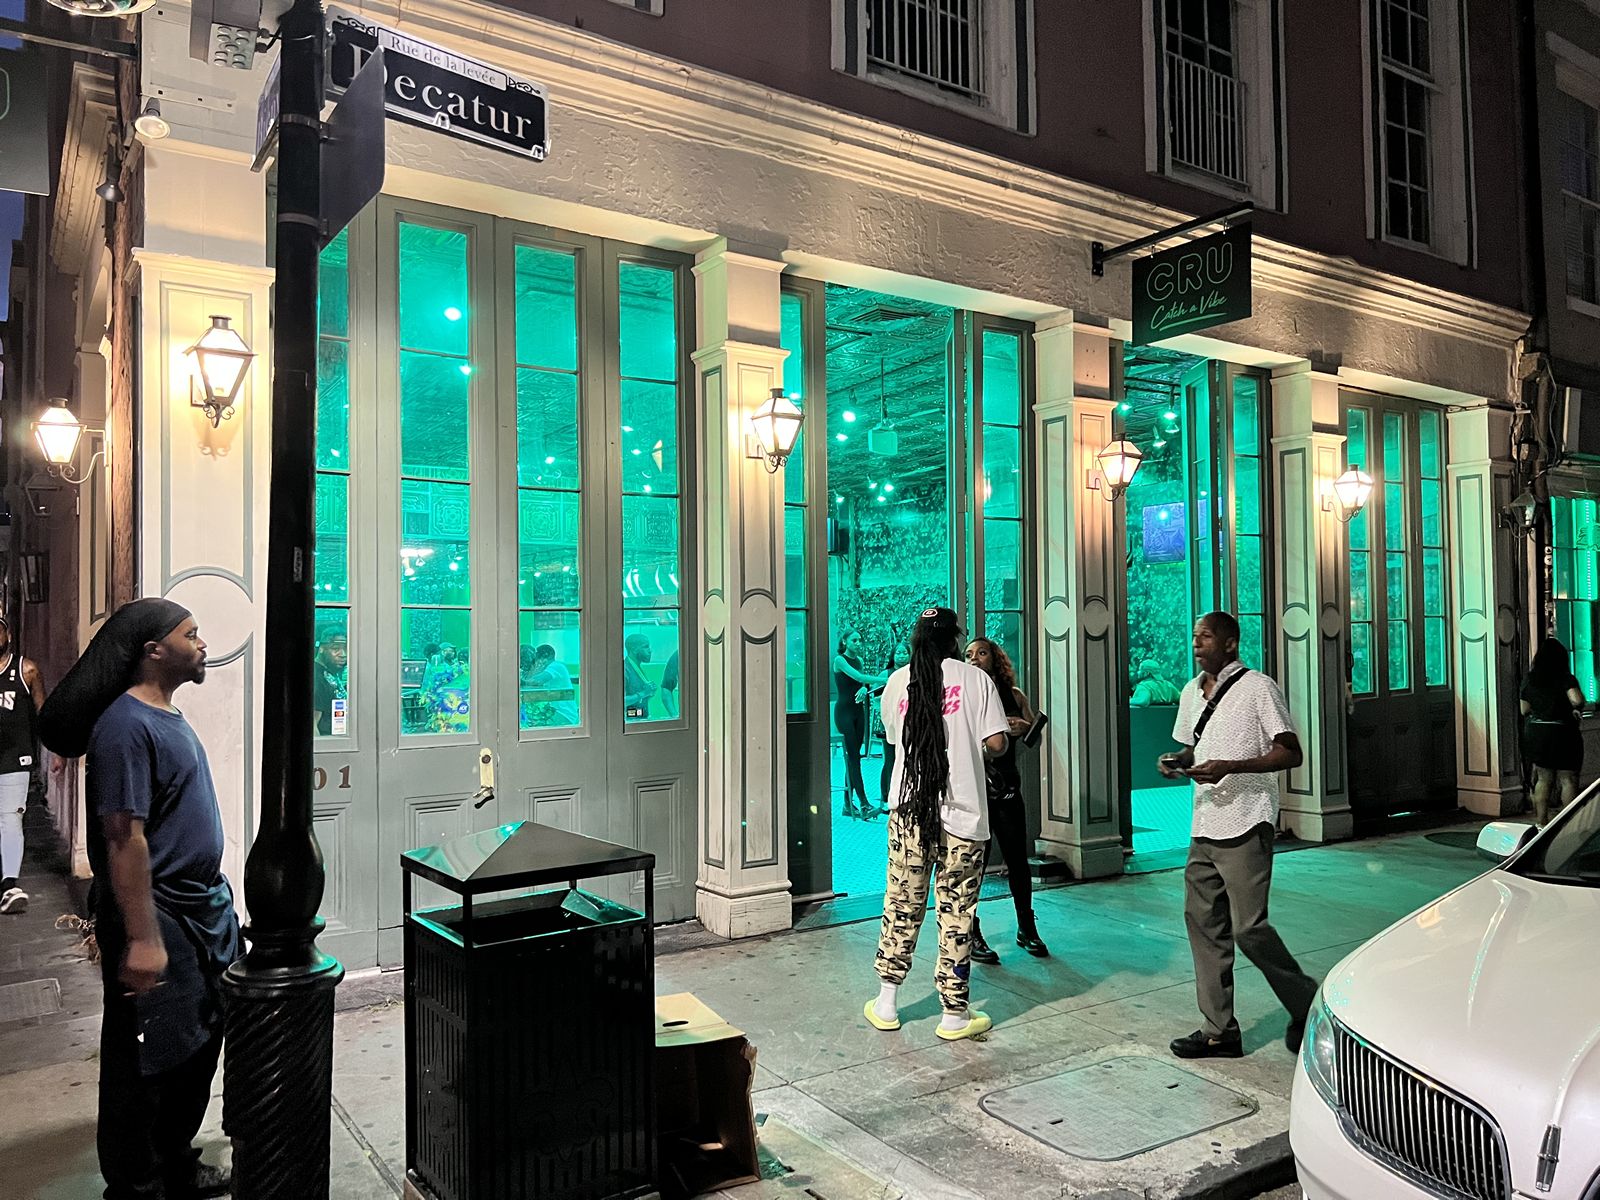 CRU Opens in New Orleans' French Quarter